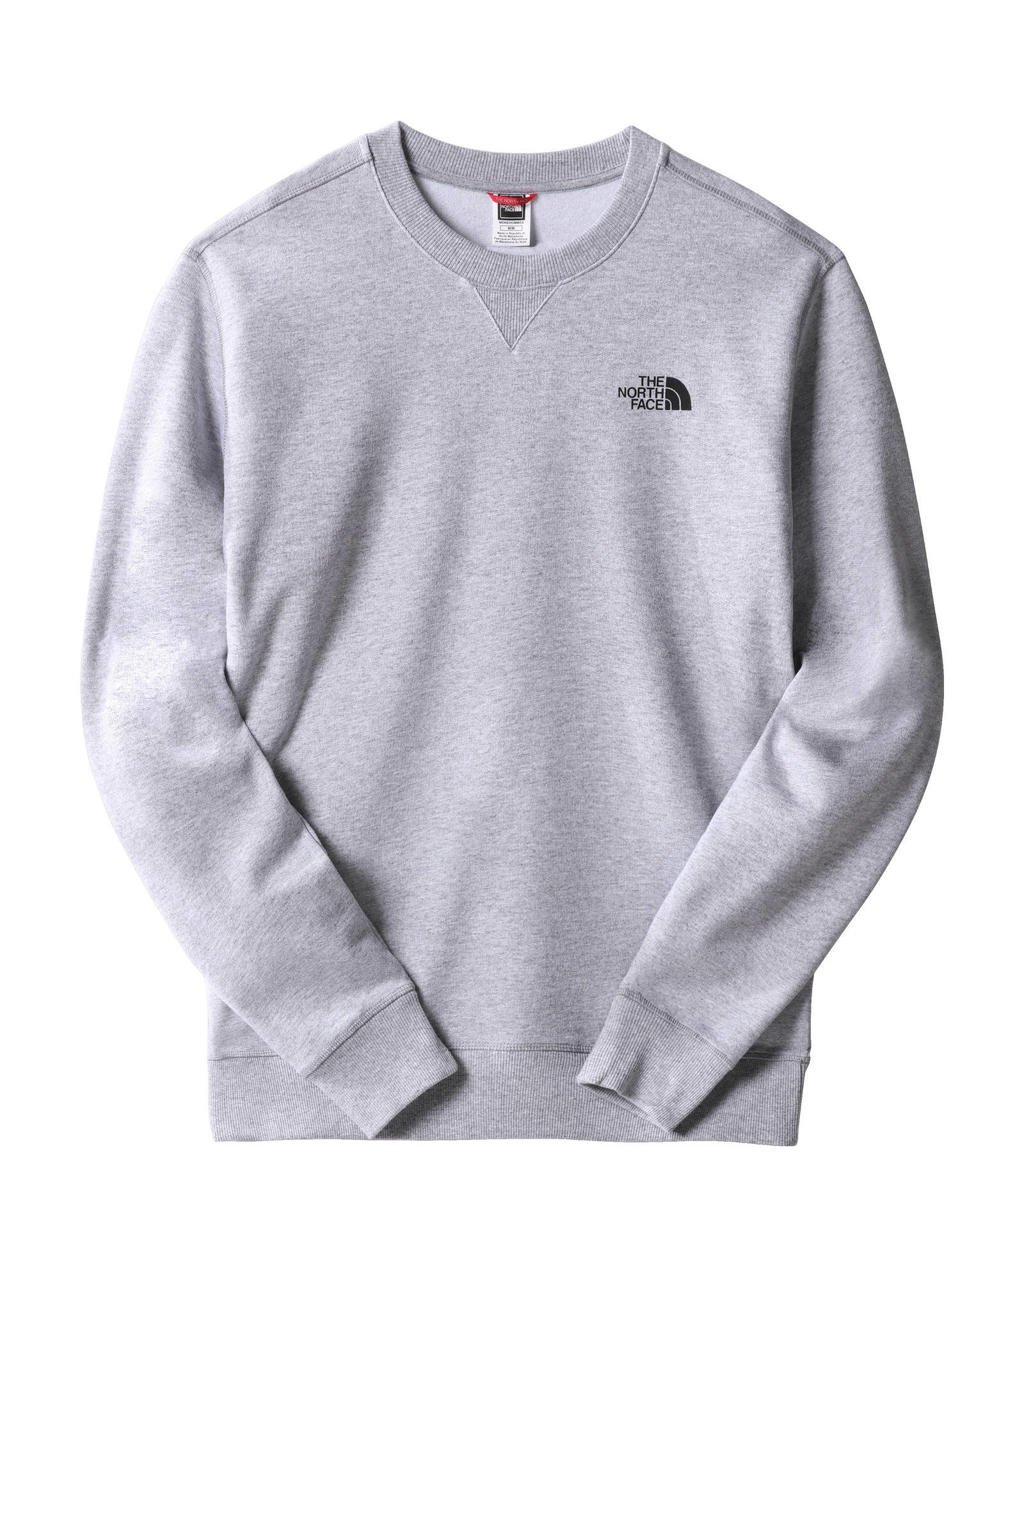 The North Face sweater Simple Dome met logo grijs